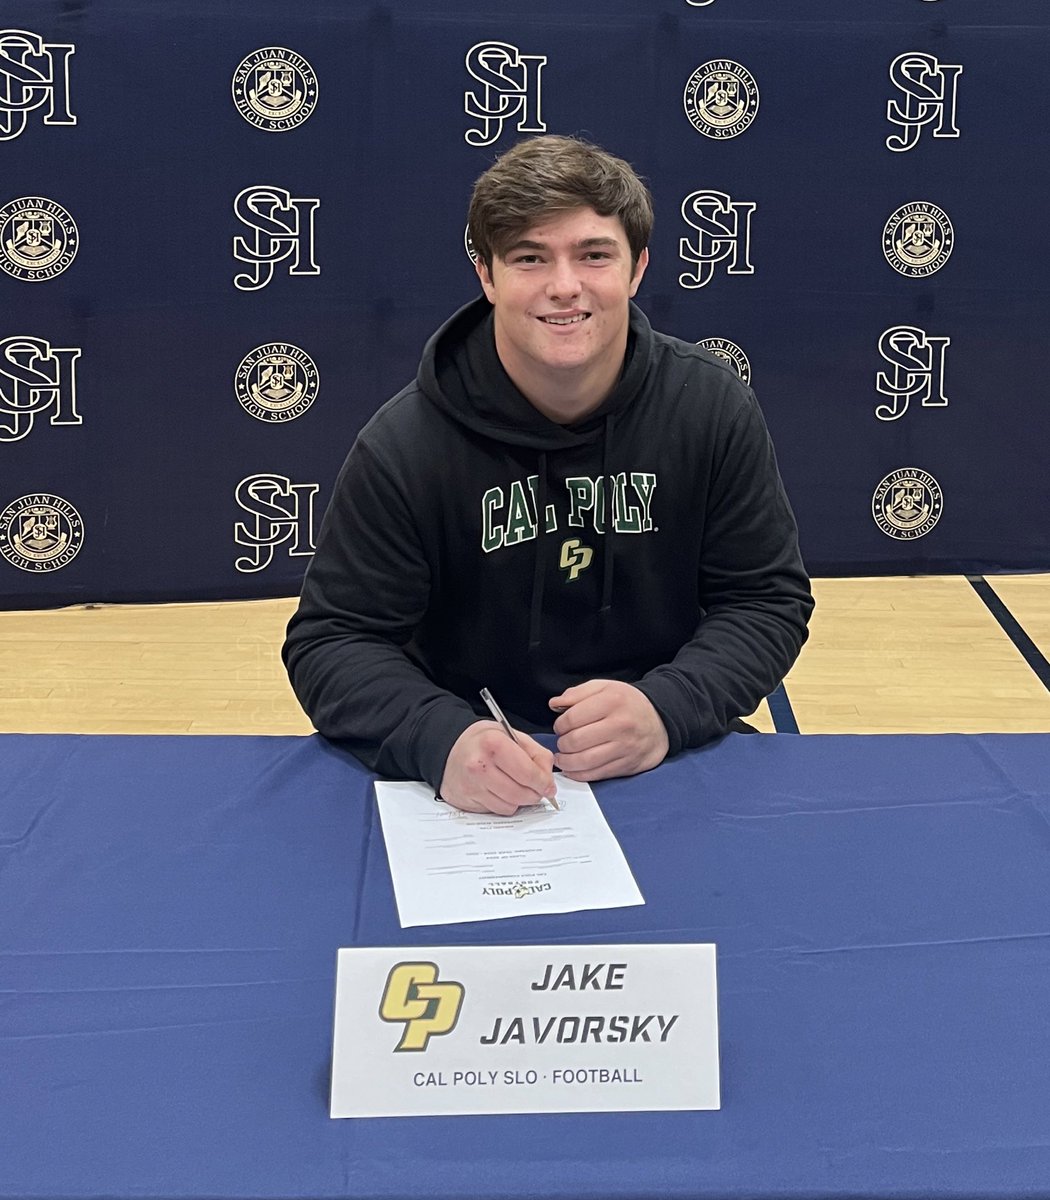 🟢🐎⚫️JAKE JAVORSKY⚫️🐎🟢 ✍️Signed➡️Sealed➡️Delivered✍️ @calpolyfootball Gets the 2X SVL Defensive Player of the Year🔥 Congrats @javorsky_jake on signing your NLI and becoming a MUSTANG🐎 #NoBetterPlace🐎 #BuiltAtTheBadlands🏟